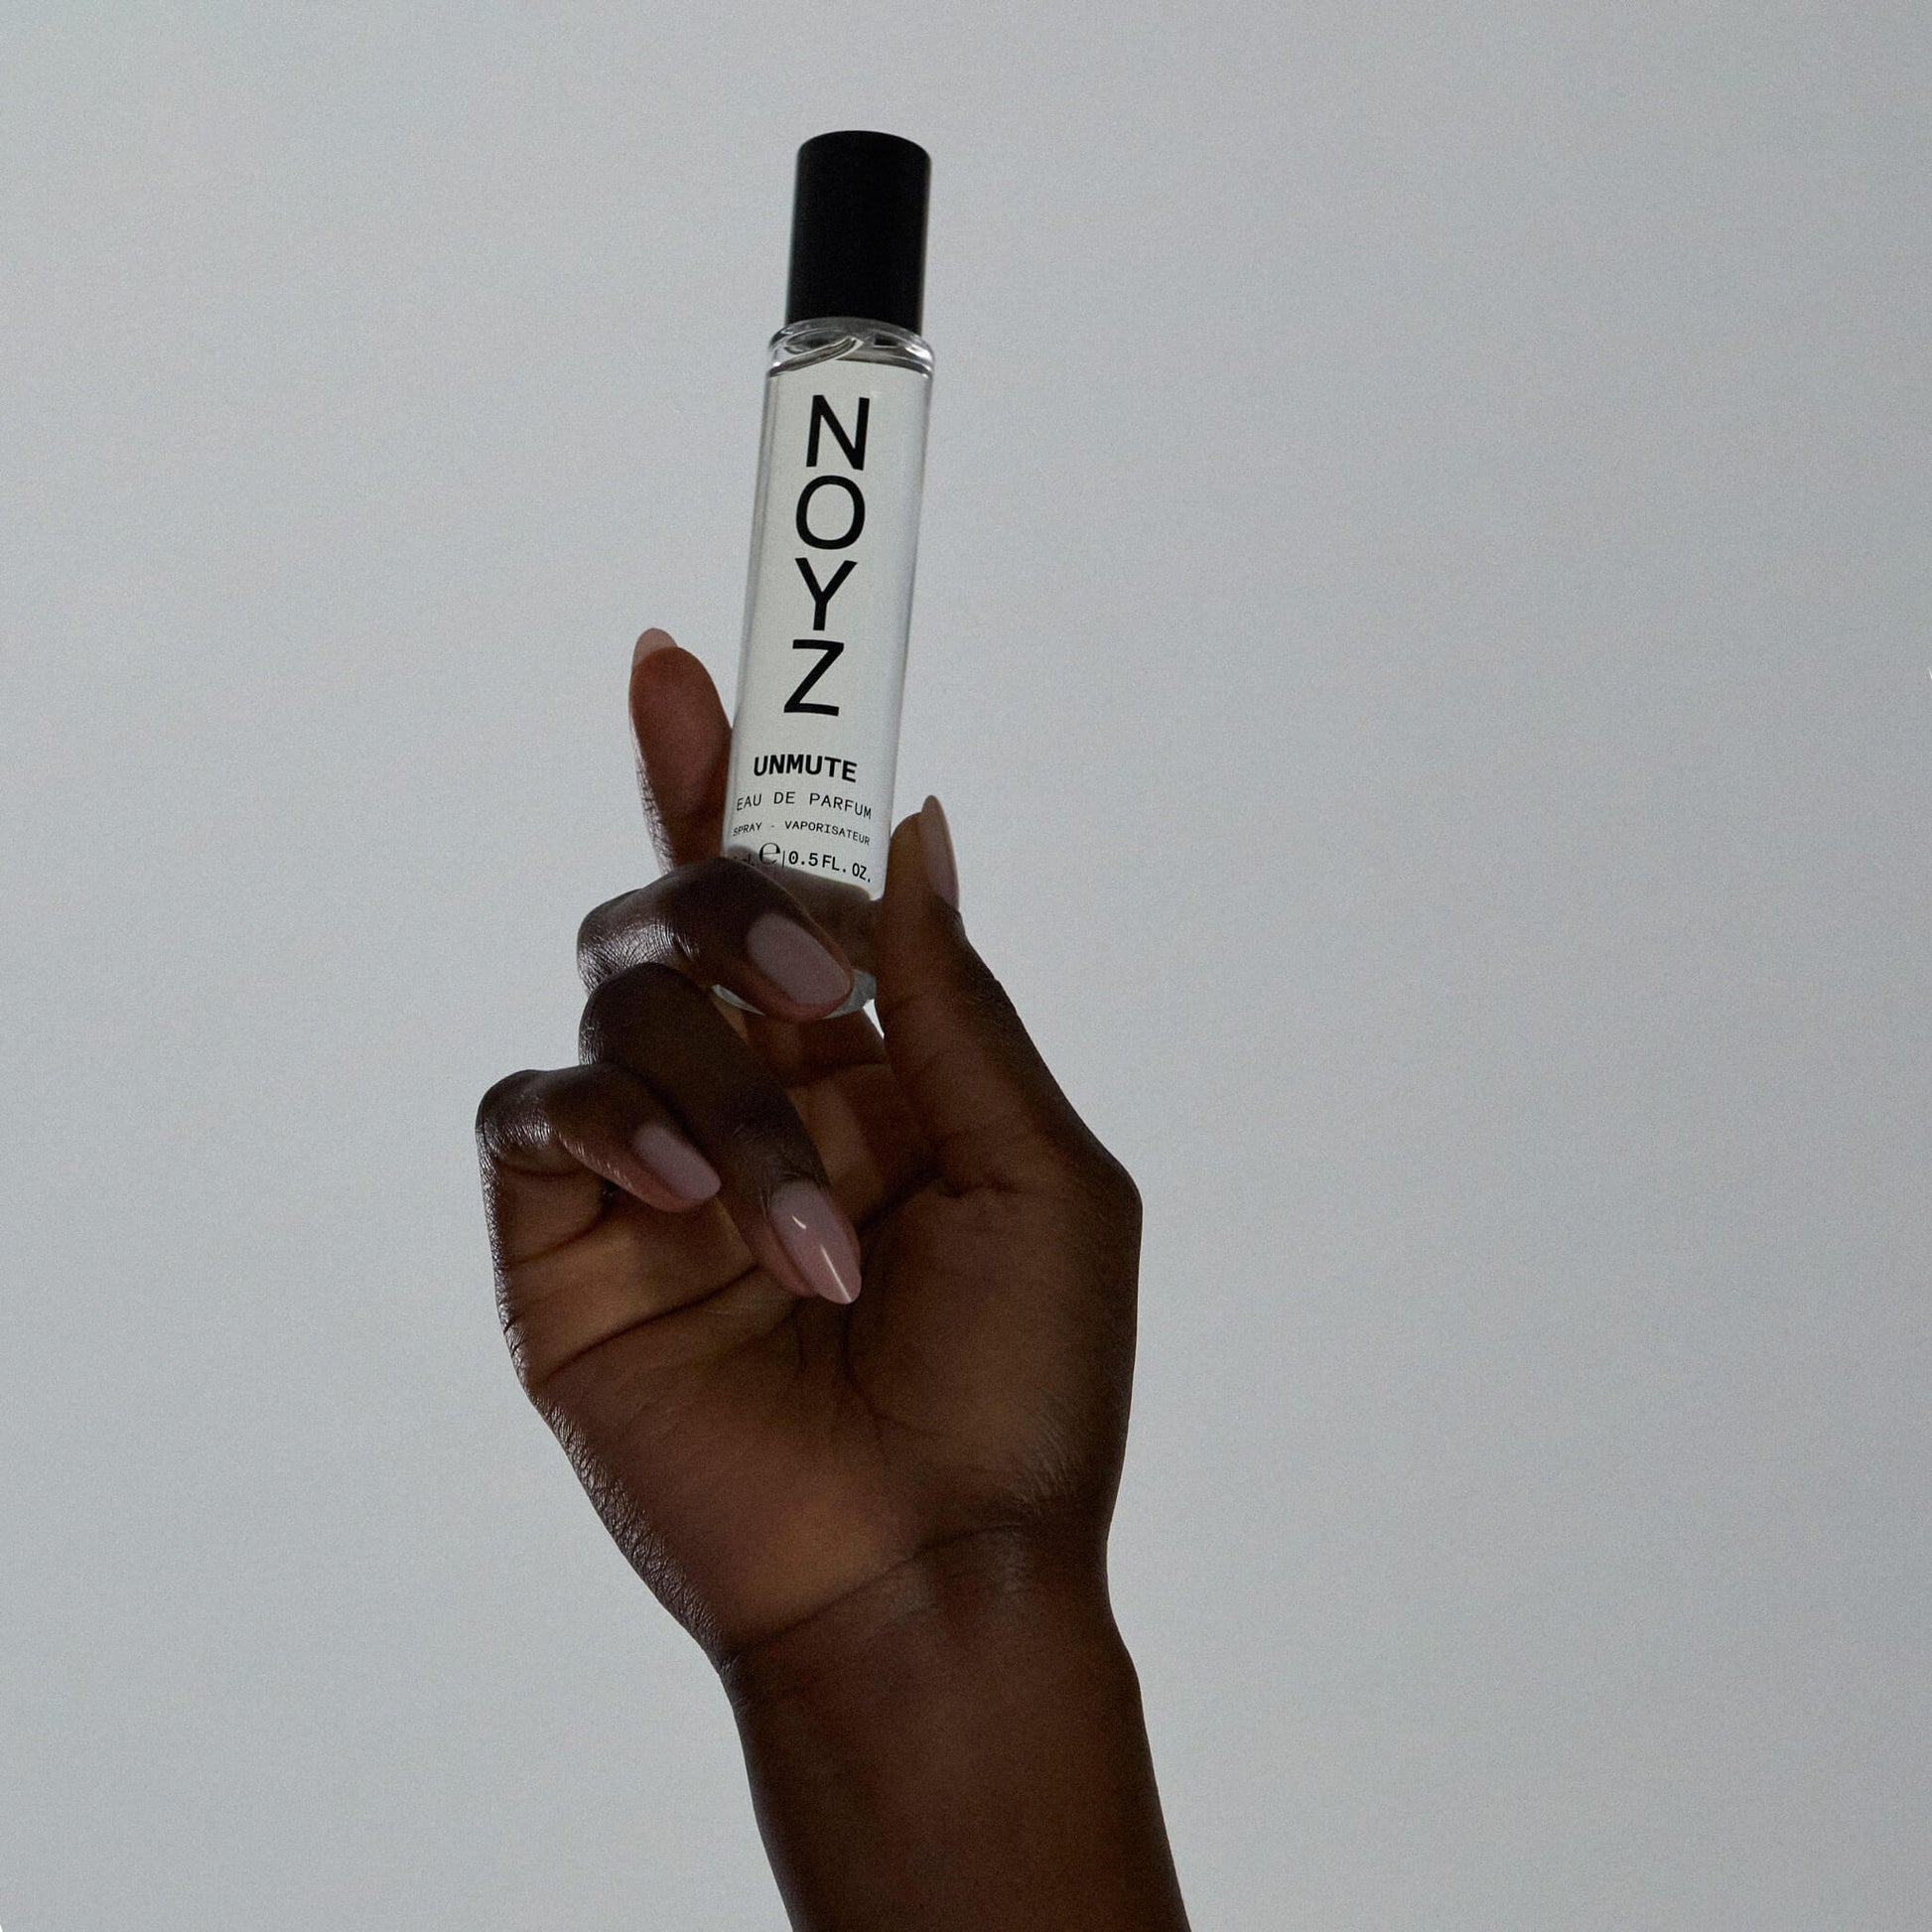 An upraised hand holds a small glass bottle of Noyz Unmute fragrance shows the best unisex fragrance